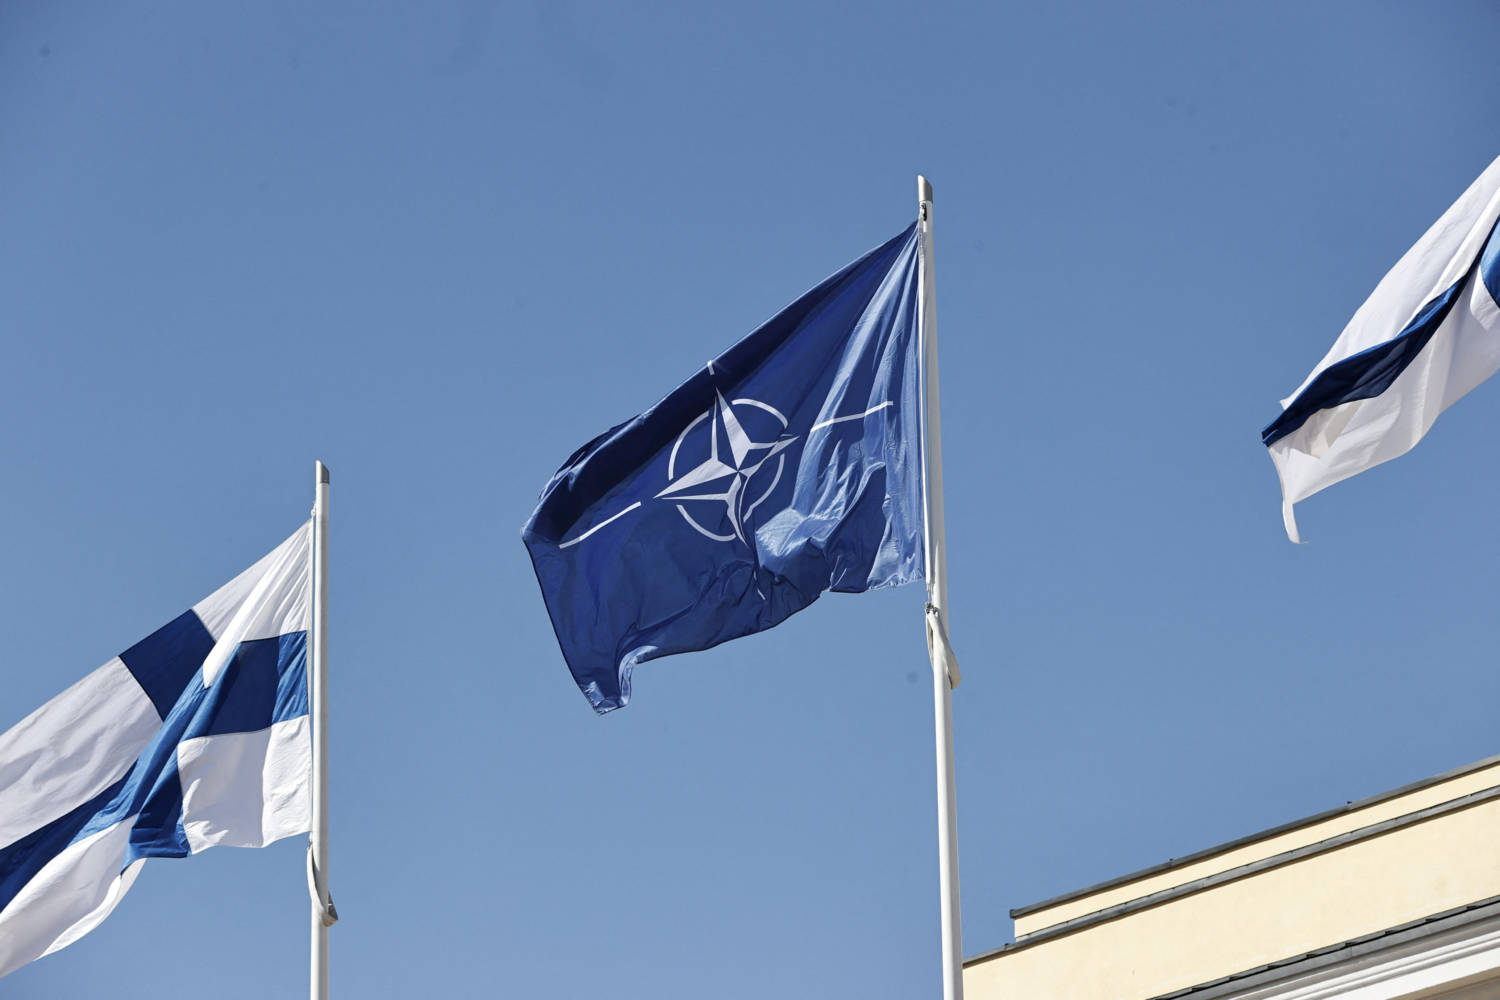 Finnish And Nato Flags Flutter At The Courtyard Of The Foreign Ministry In Helsinki